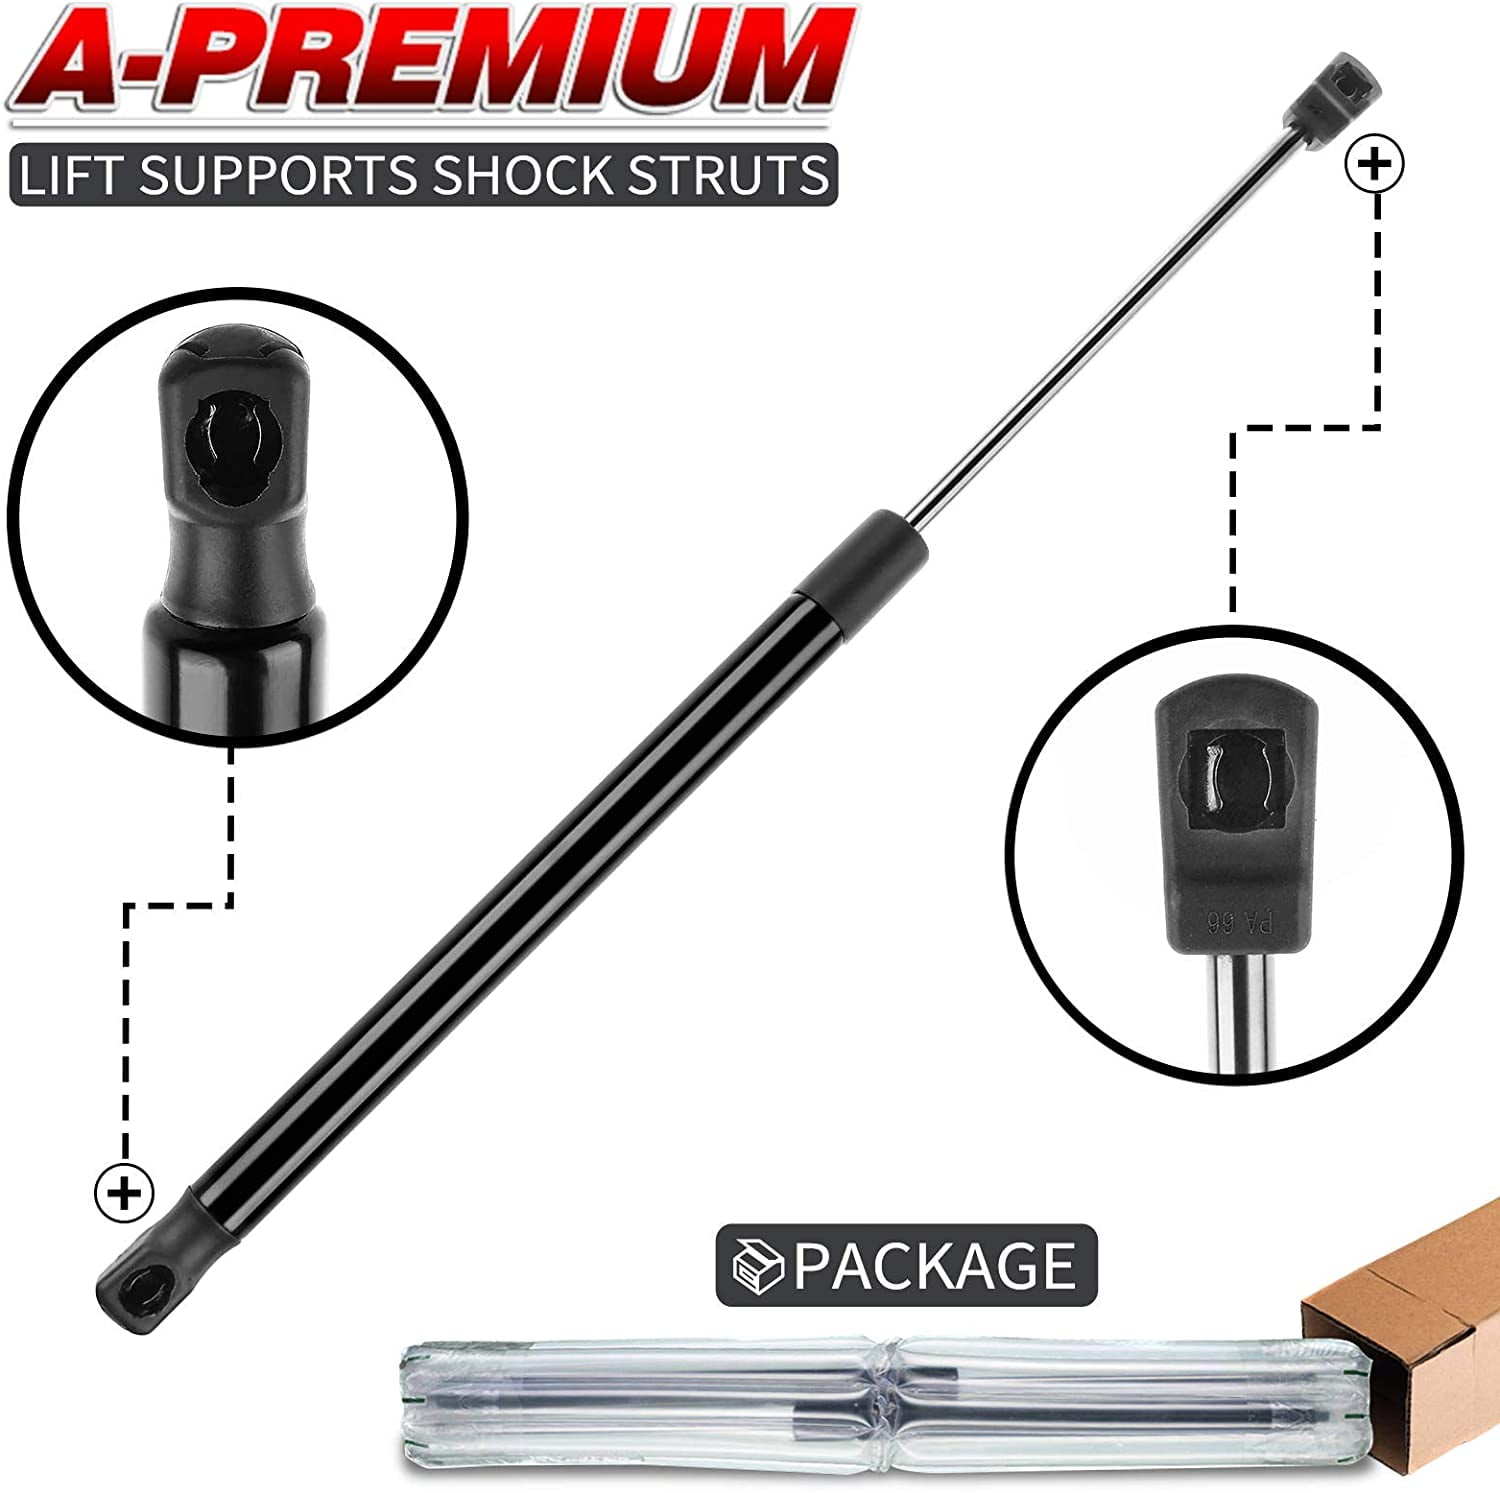 A-Premium Front Hood Lift Support Shock Strut Compatible with Audi A3 2009-2013 A3 Quattro 2006-2013 S3 2008-2012 